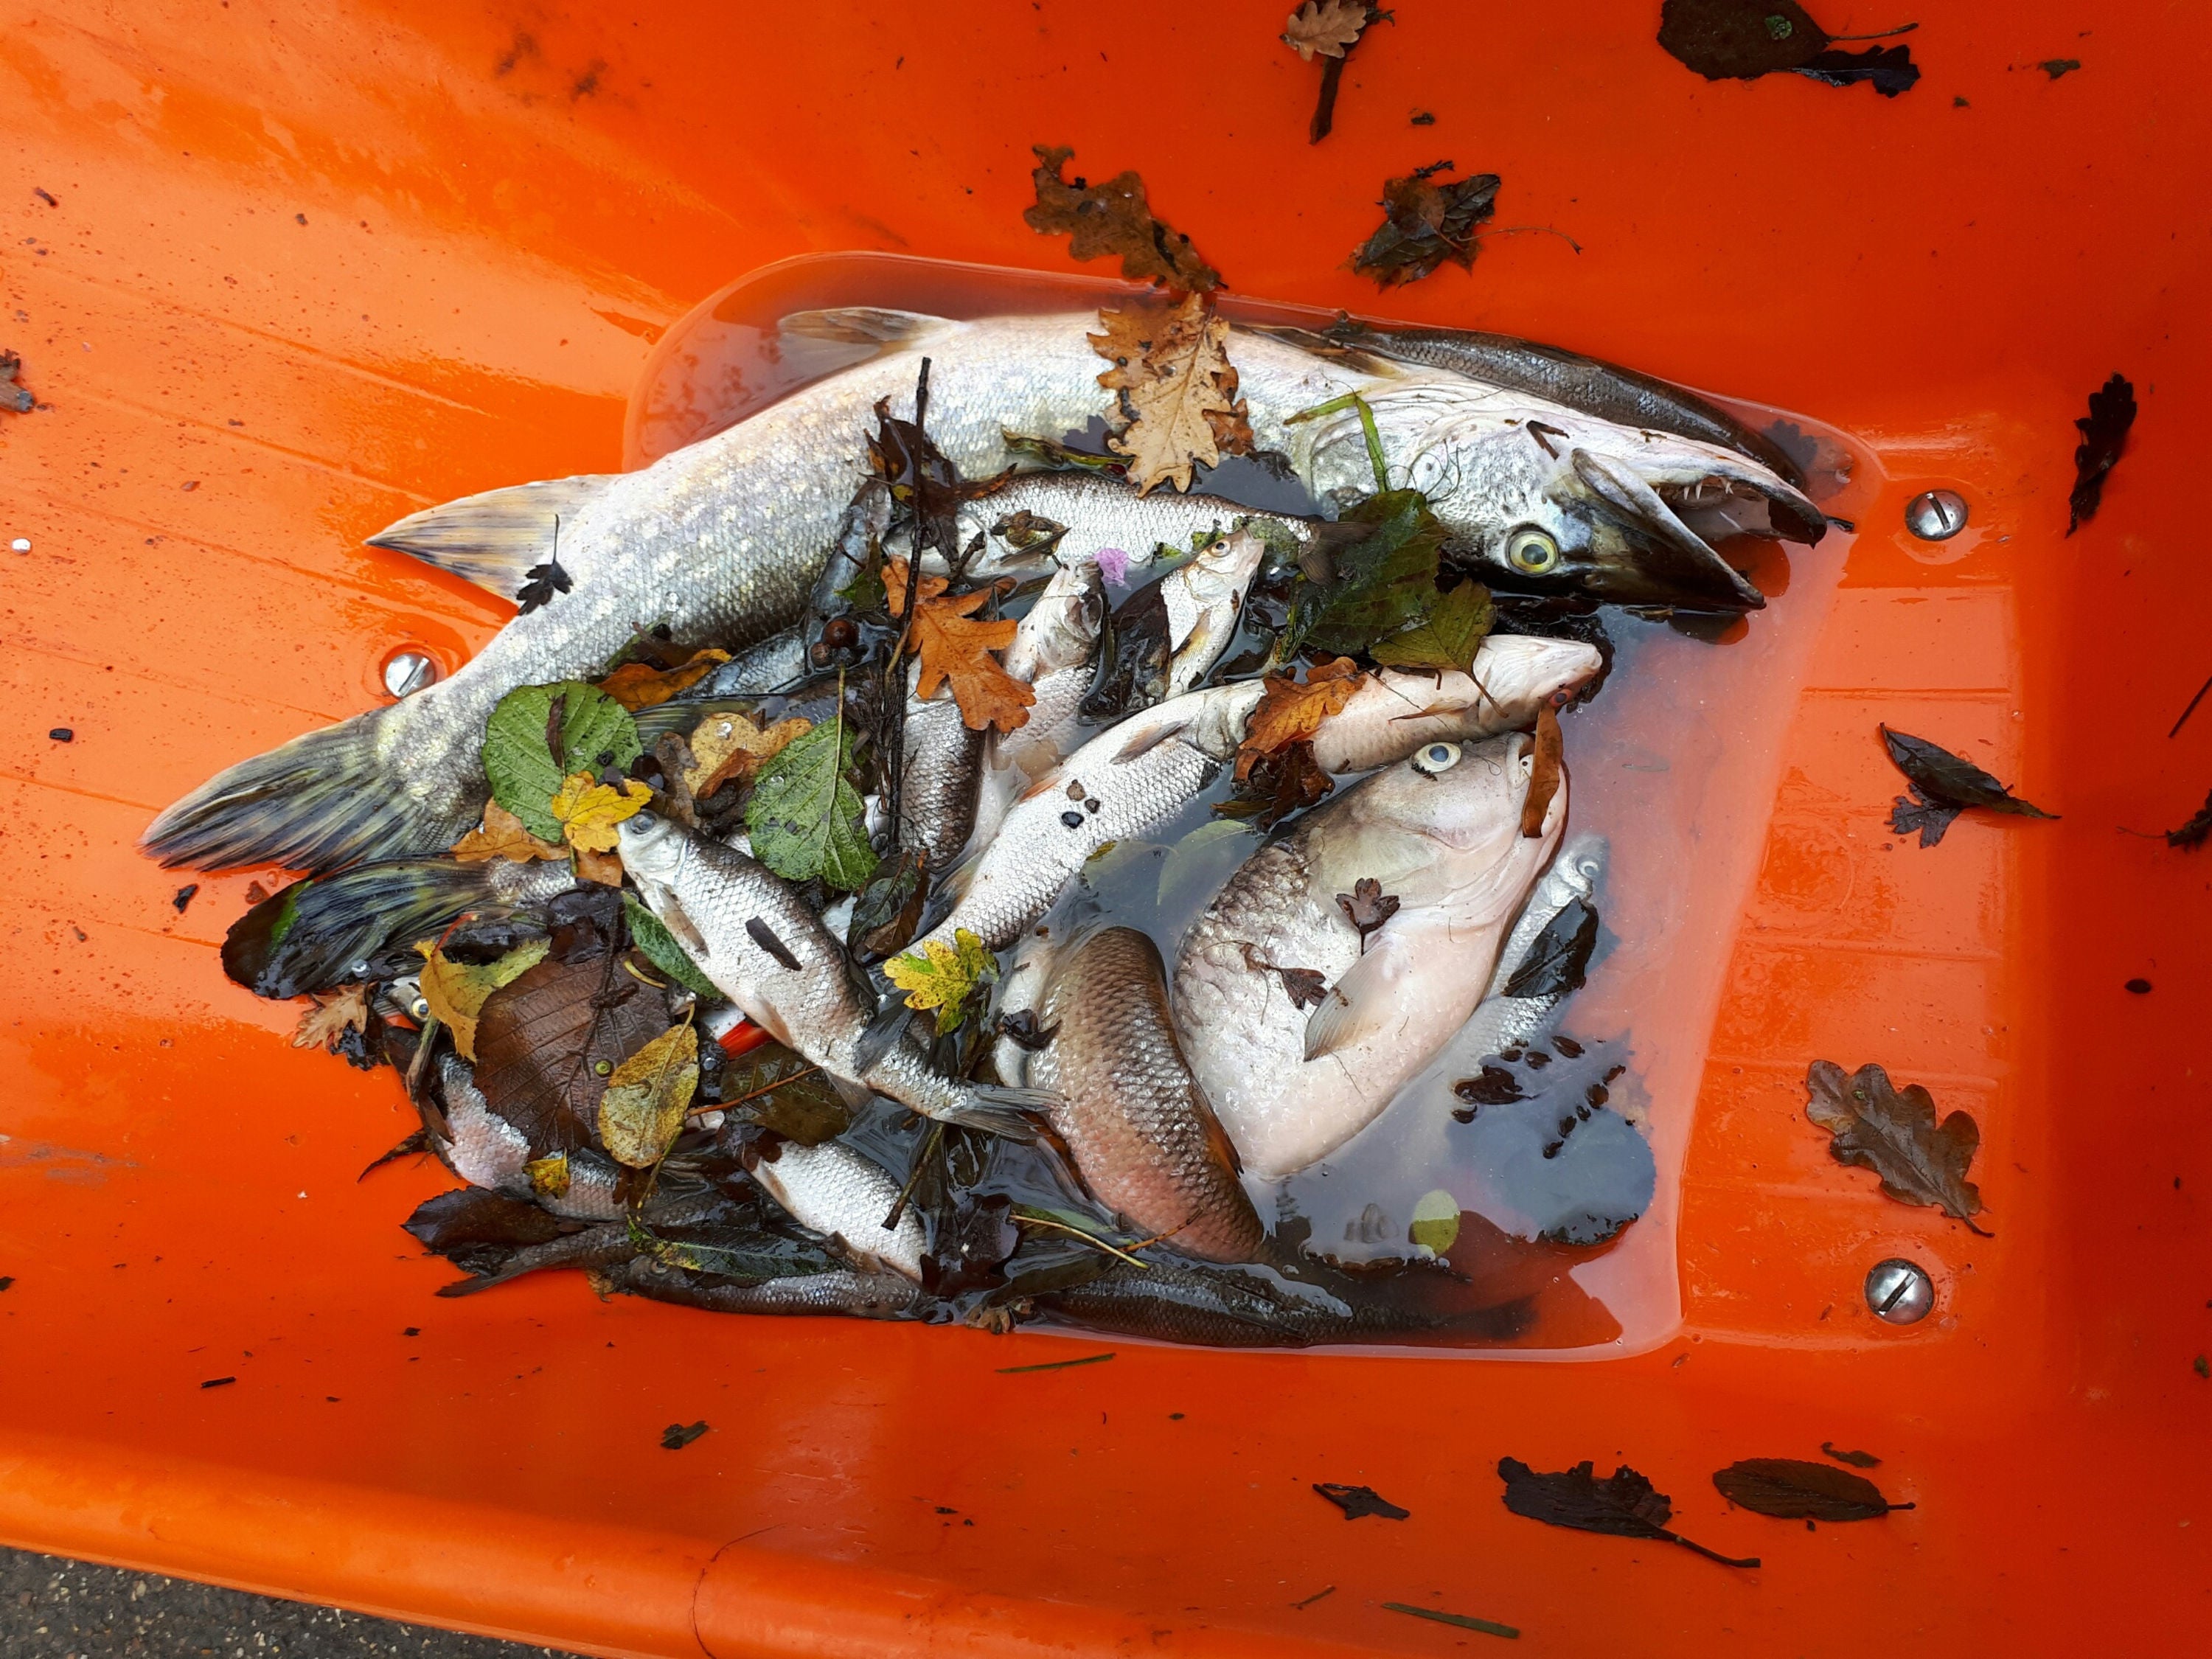 Handout photo issued by the Environment Agency of some of the thousands of fish likely to have died in polluted rivers